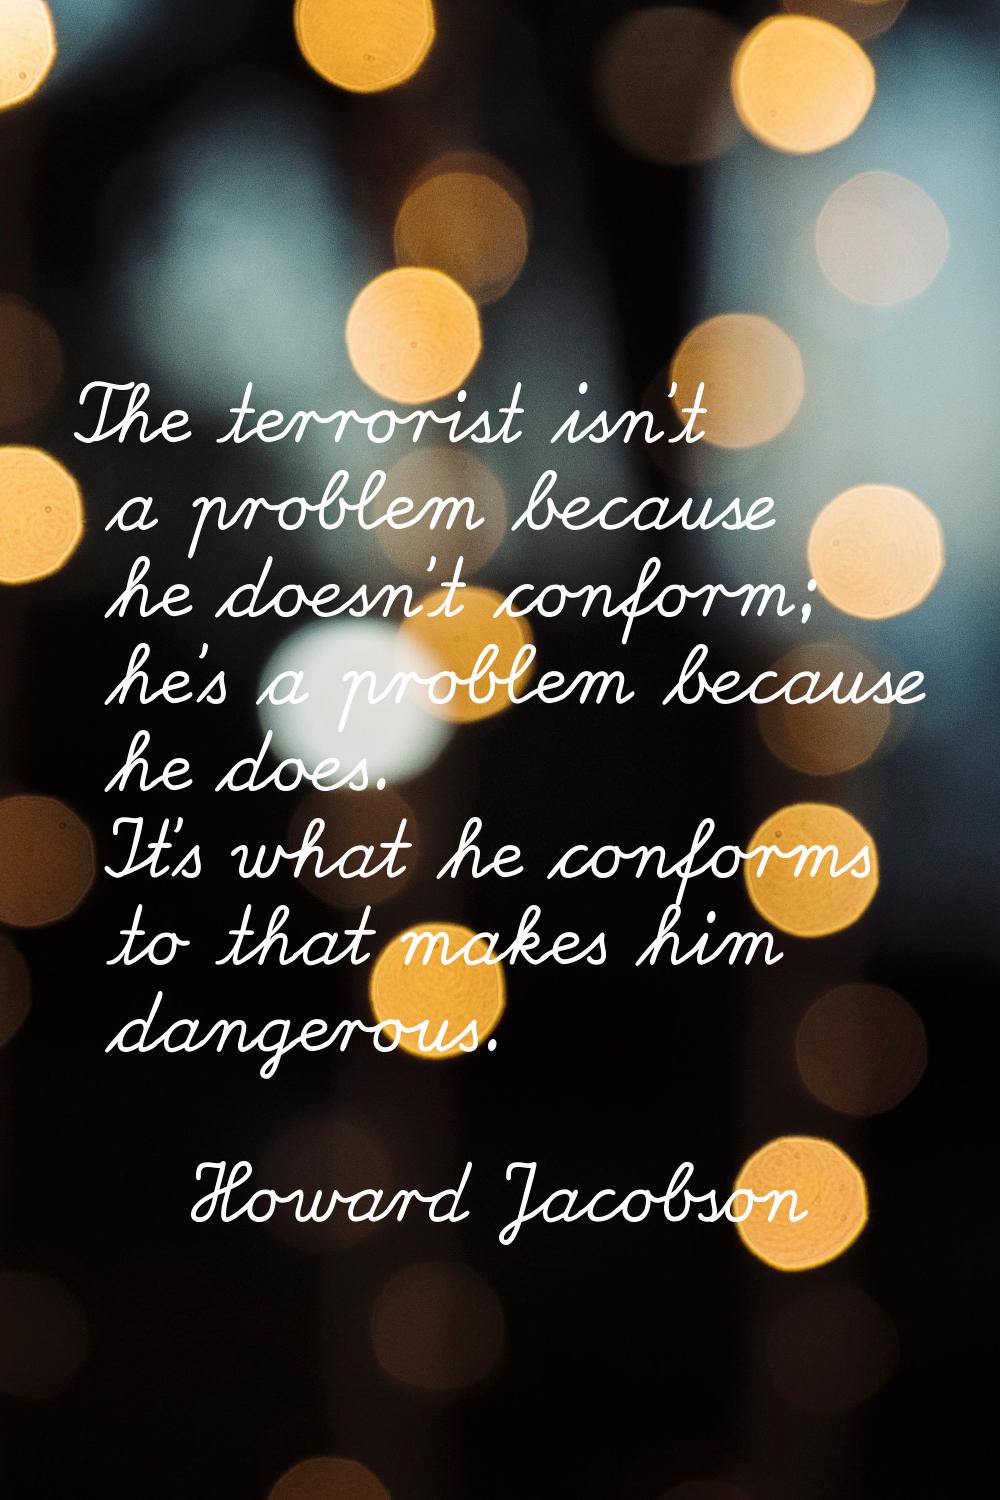 The terrorist isn't a problem because he doesn't conform; he's a problem because he does. It's what